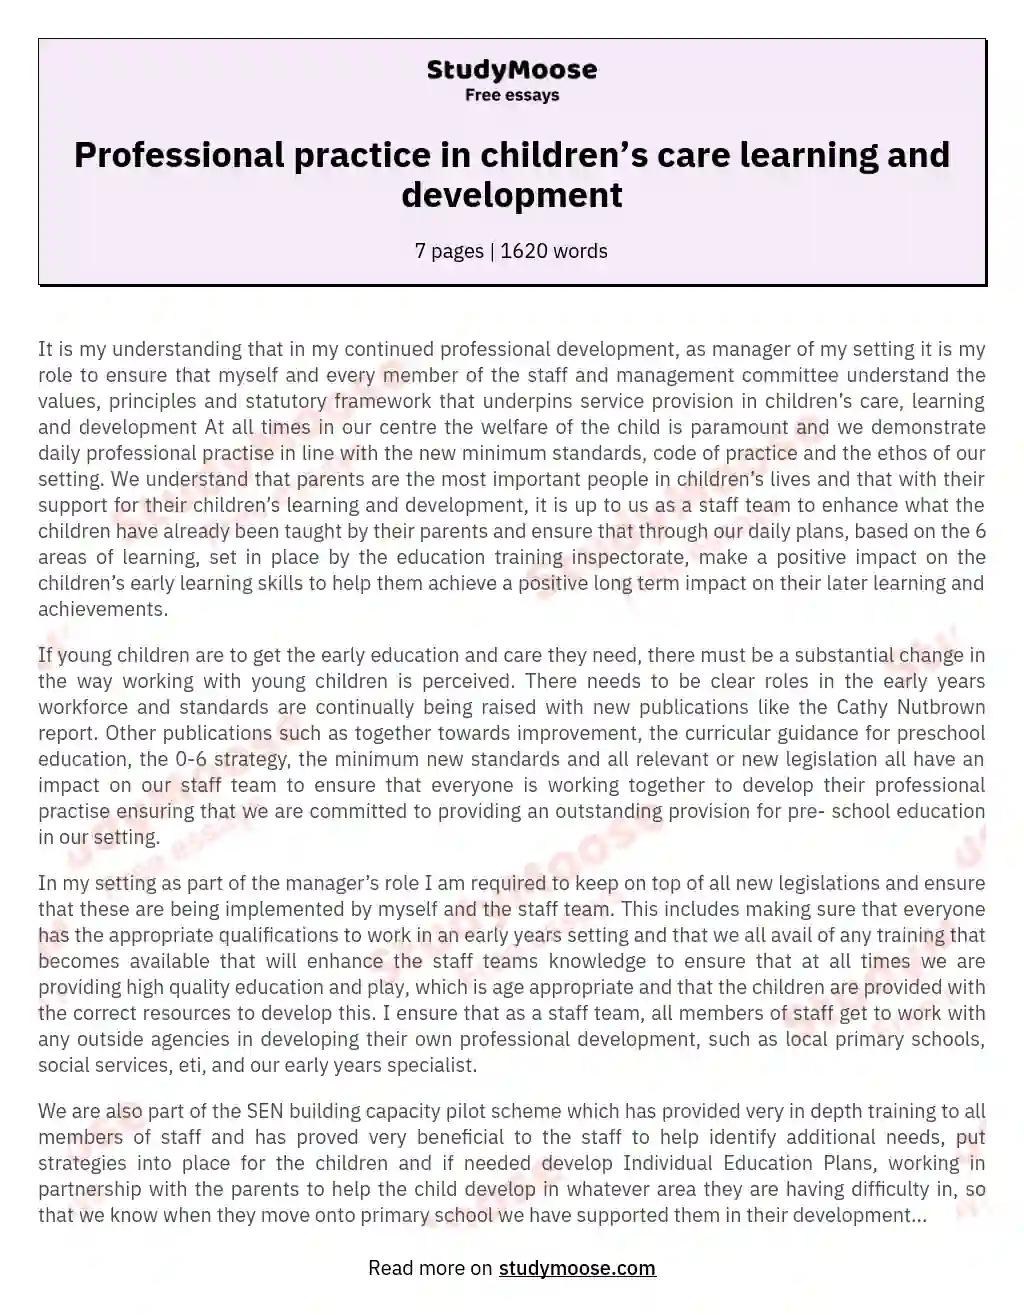 Professional practice in children’s care learning and development